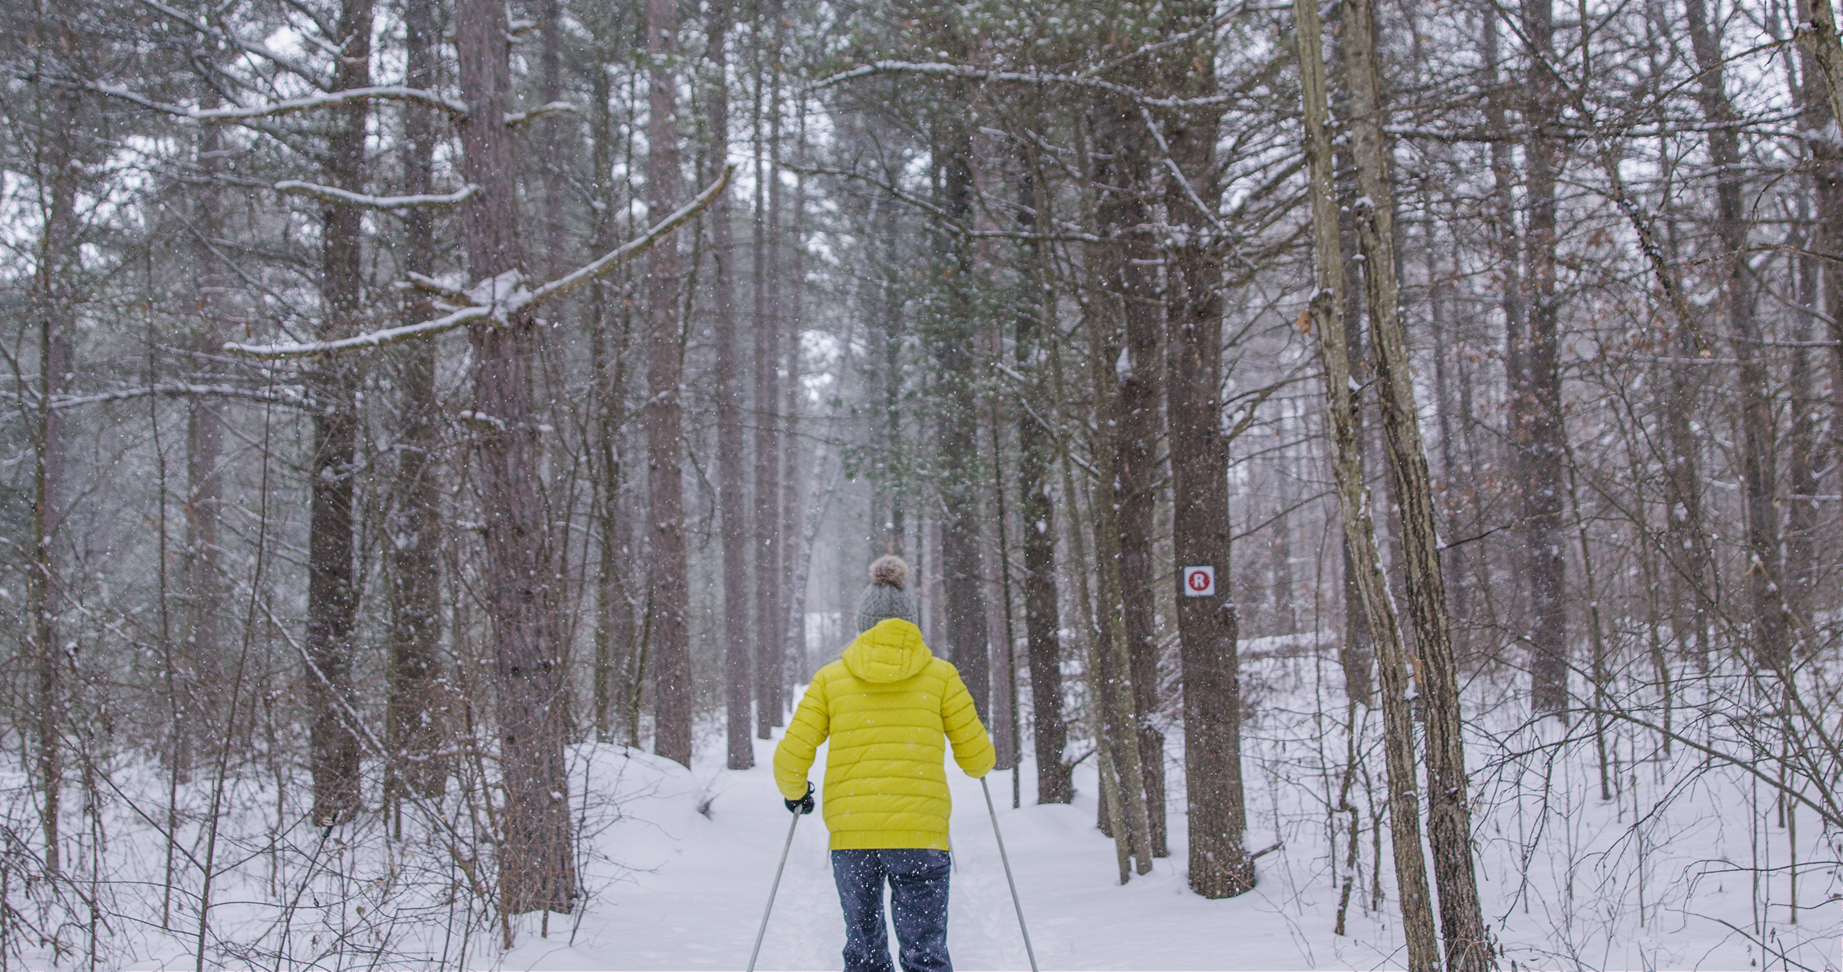 A skier in a yellow jacket heads down a corridor of trees